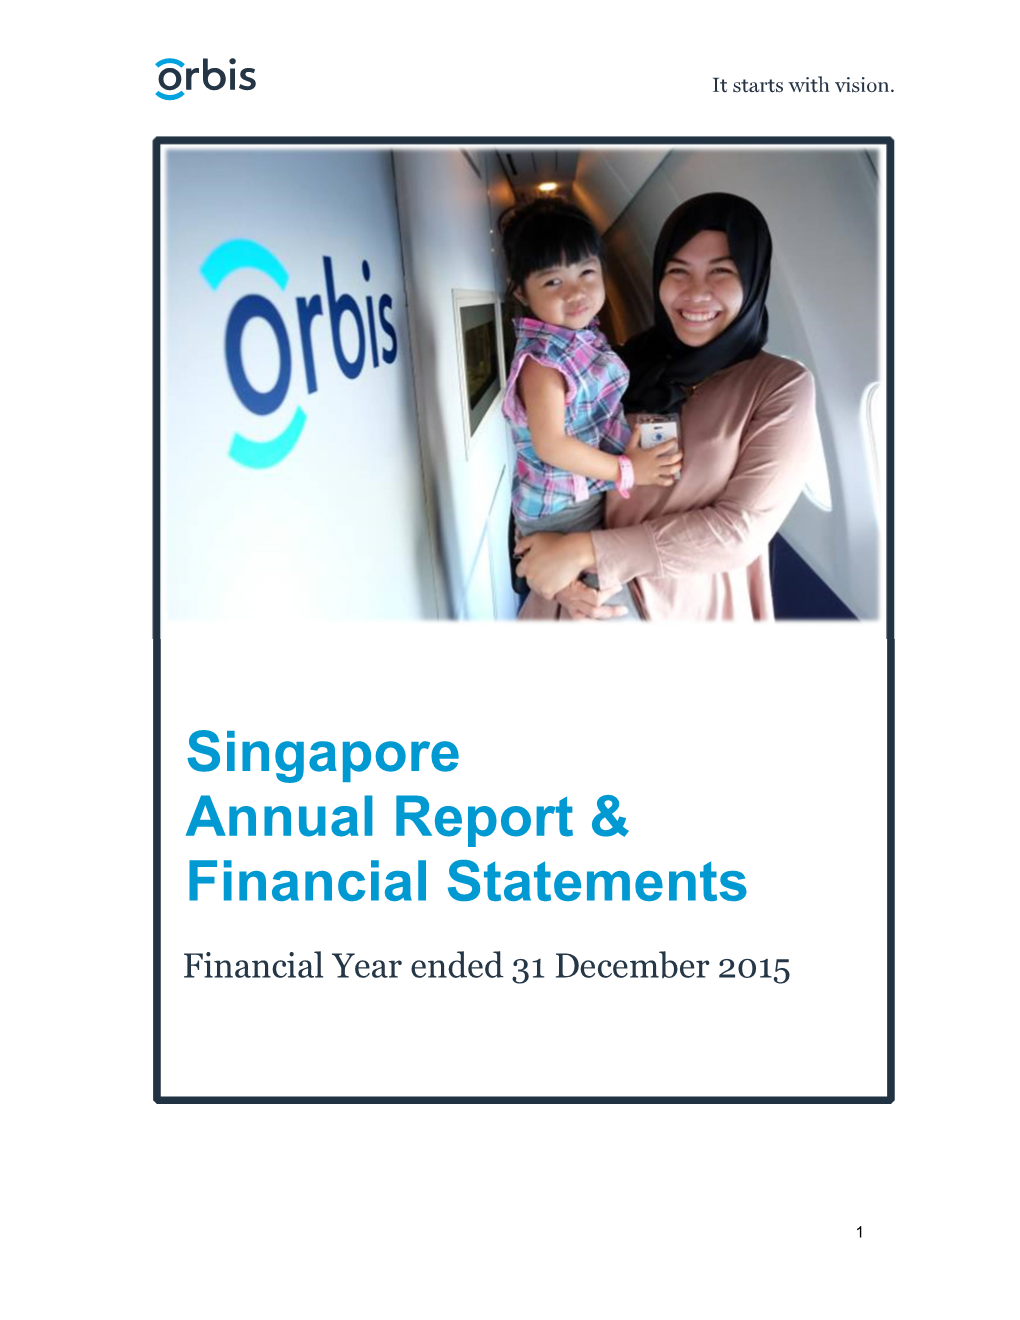 Singapore Annual Report & Financial Statements